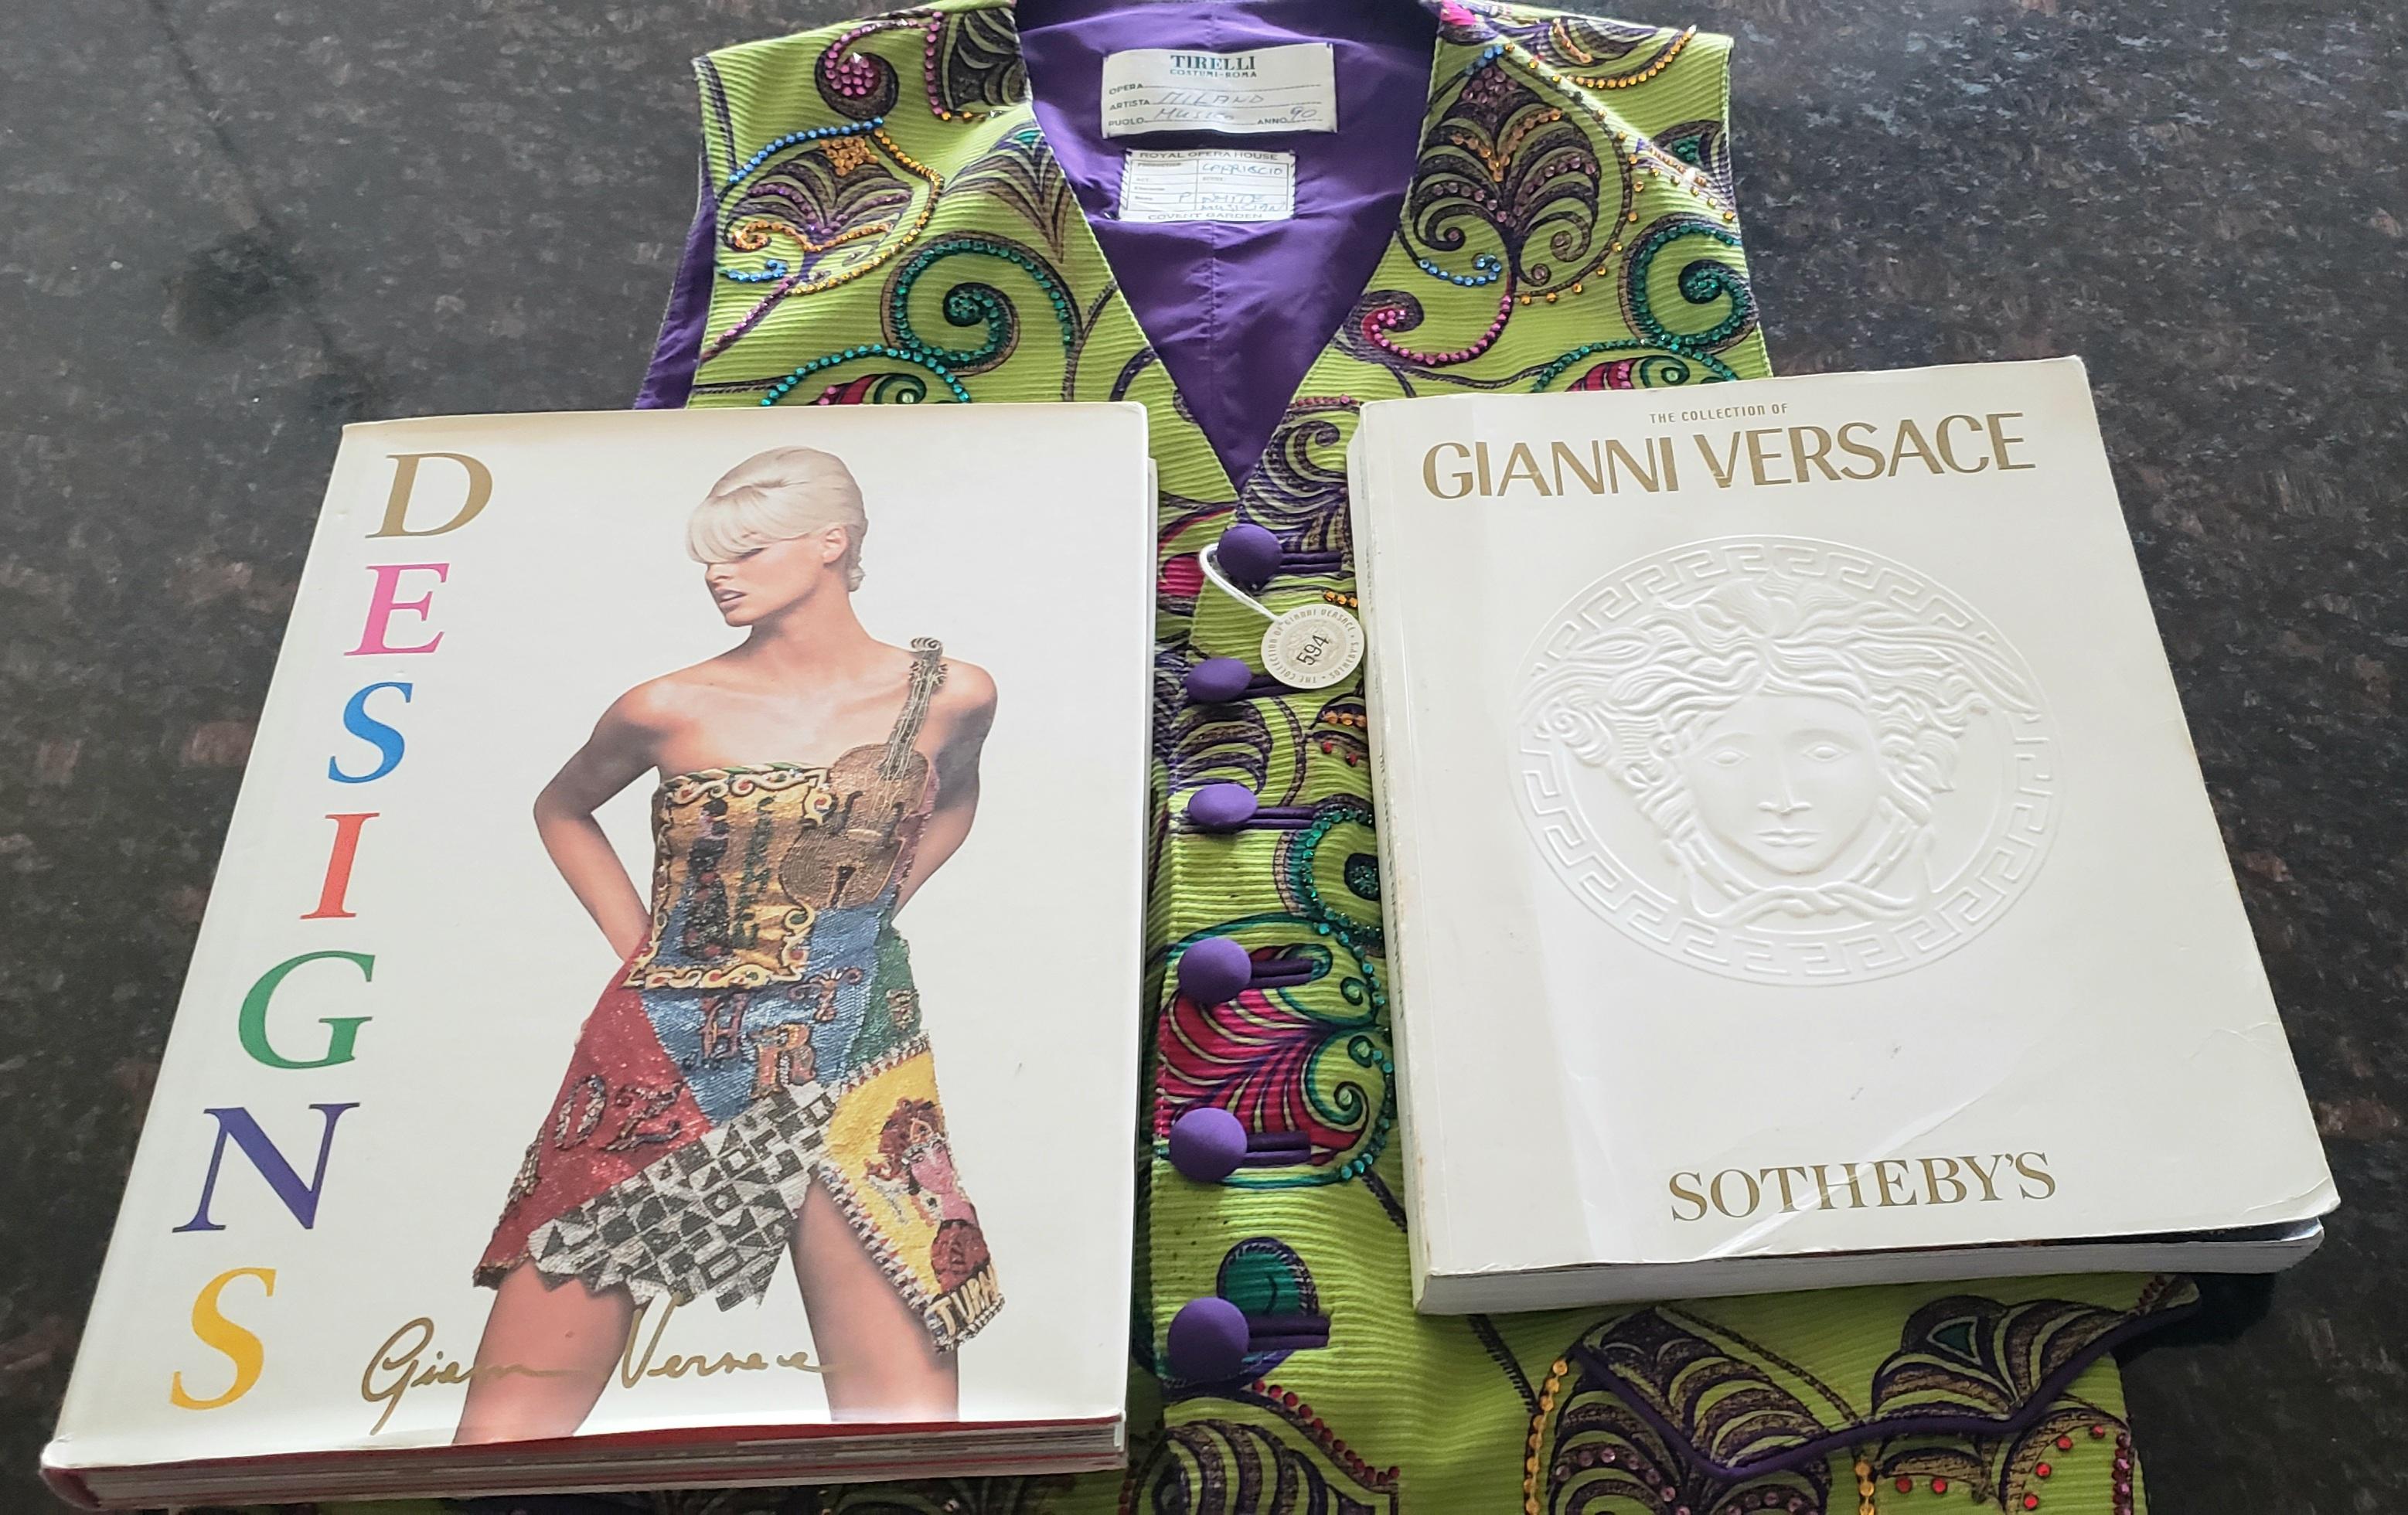 1991 GIANNI VERSACE PRIVATE COLLECTION SILK TWILL WAISTCOAT w/ SEQUIN EMBROIDERY For Sale 7